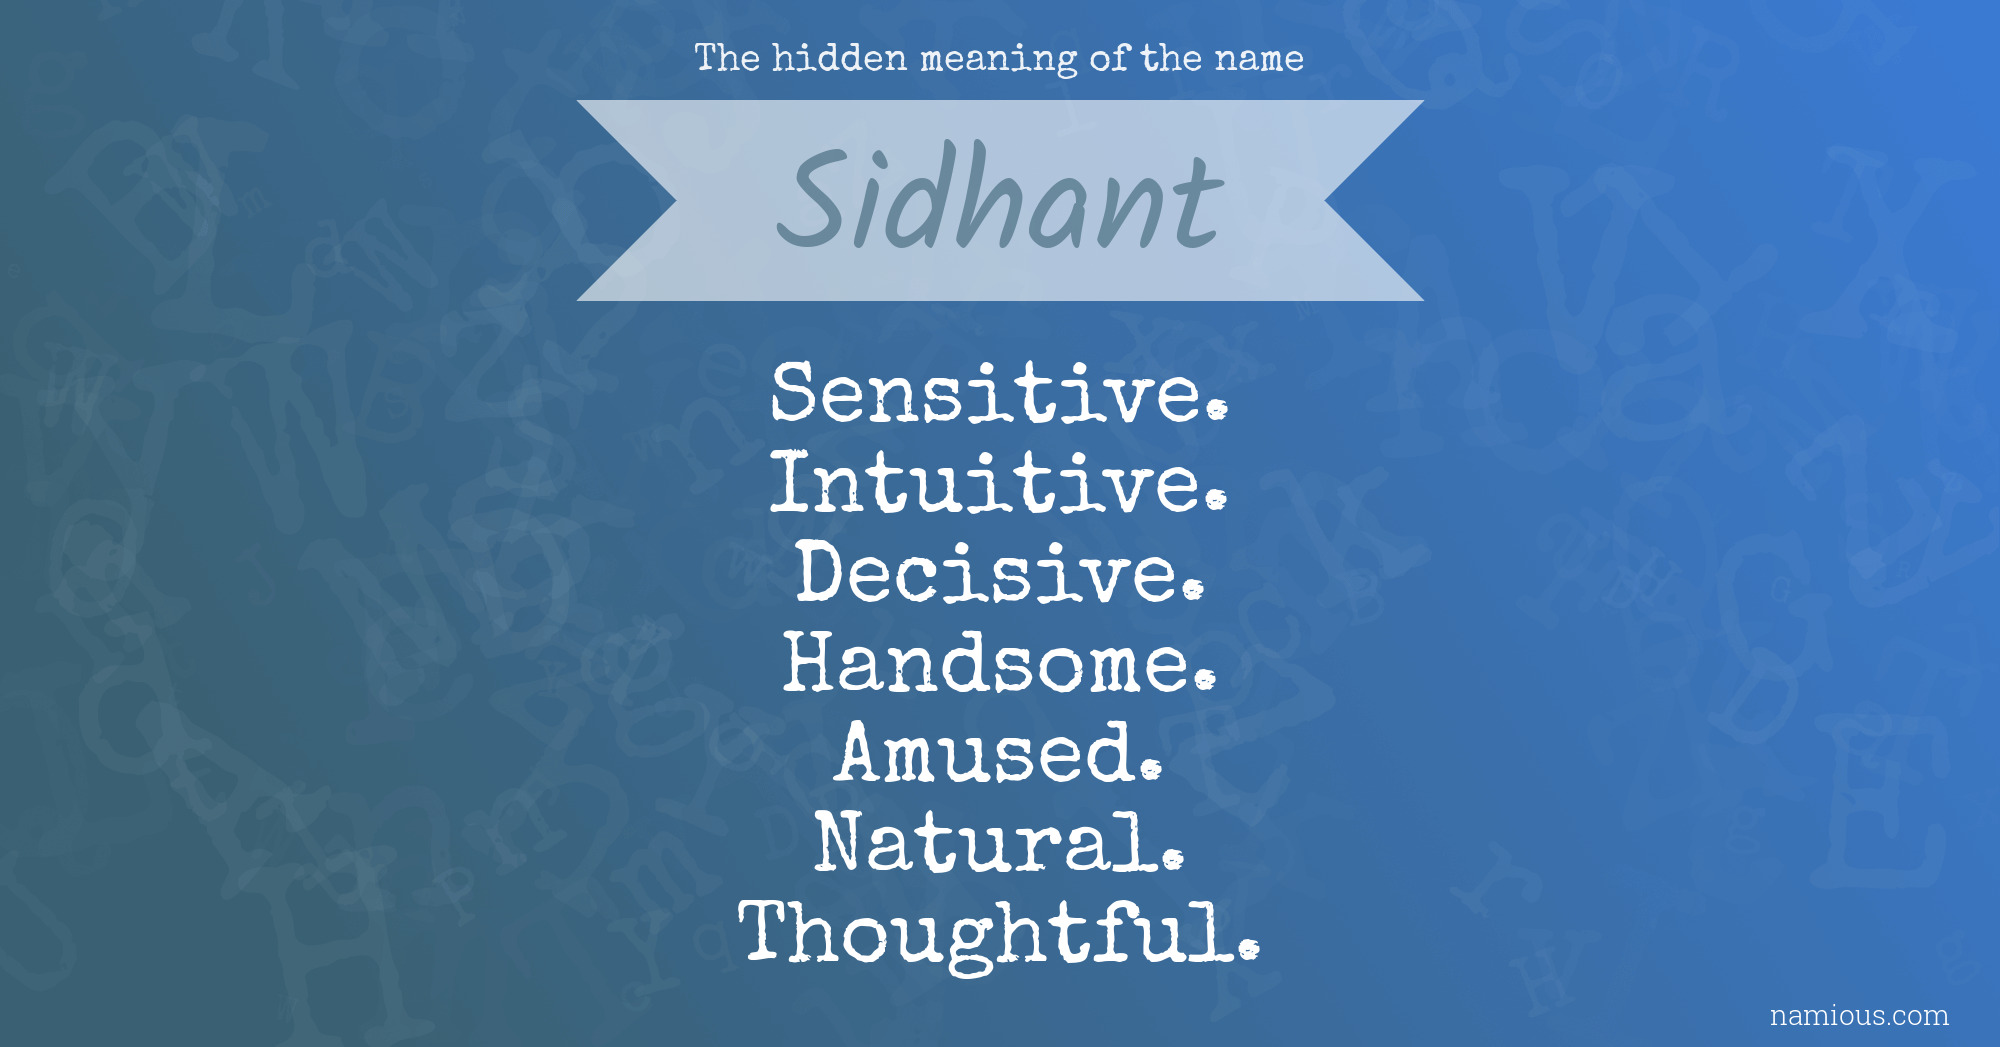 The hidden meaning of the name Sidhant